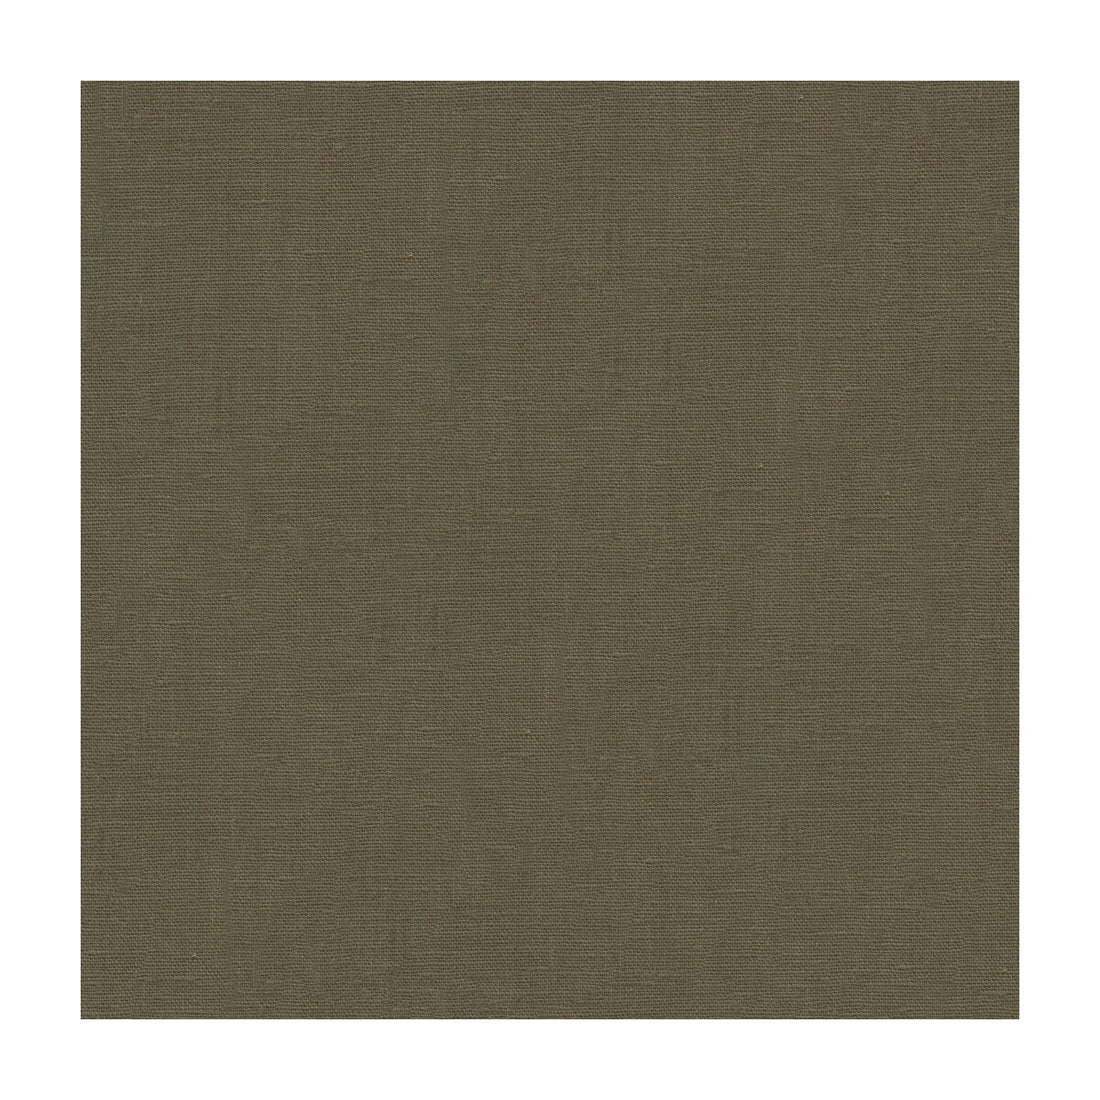 Dublin fabric in carob color - pattern 32344.606.0 - by Kravet Basics in the Perfect Plains collection